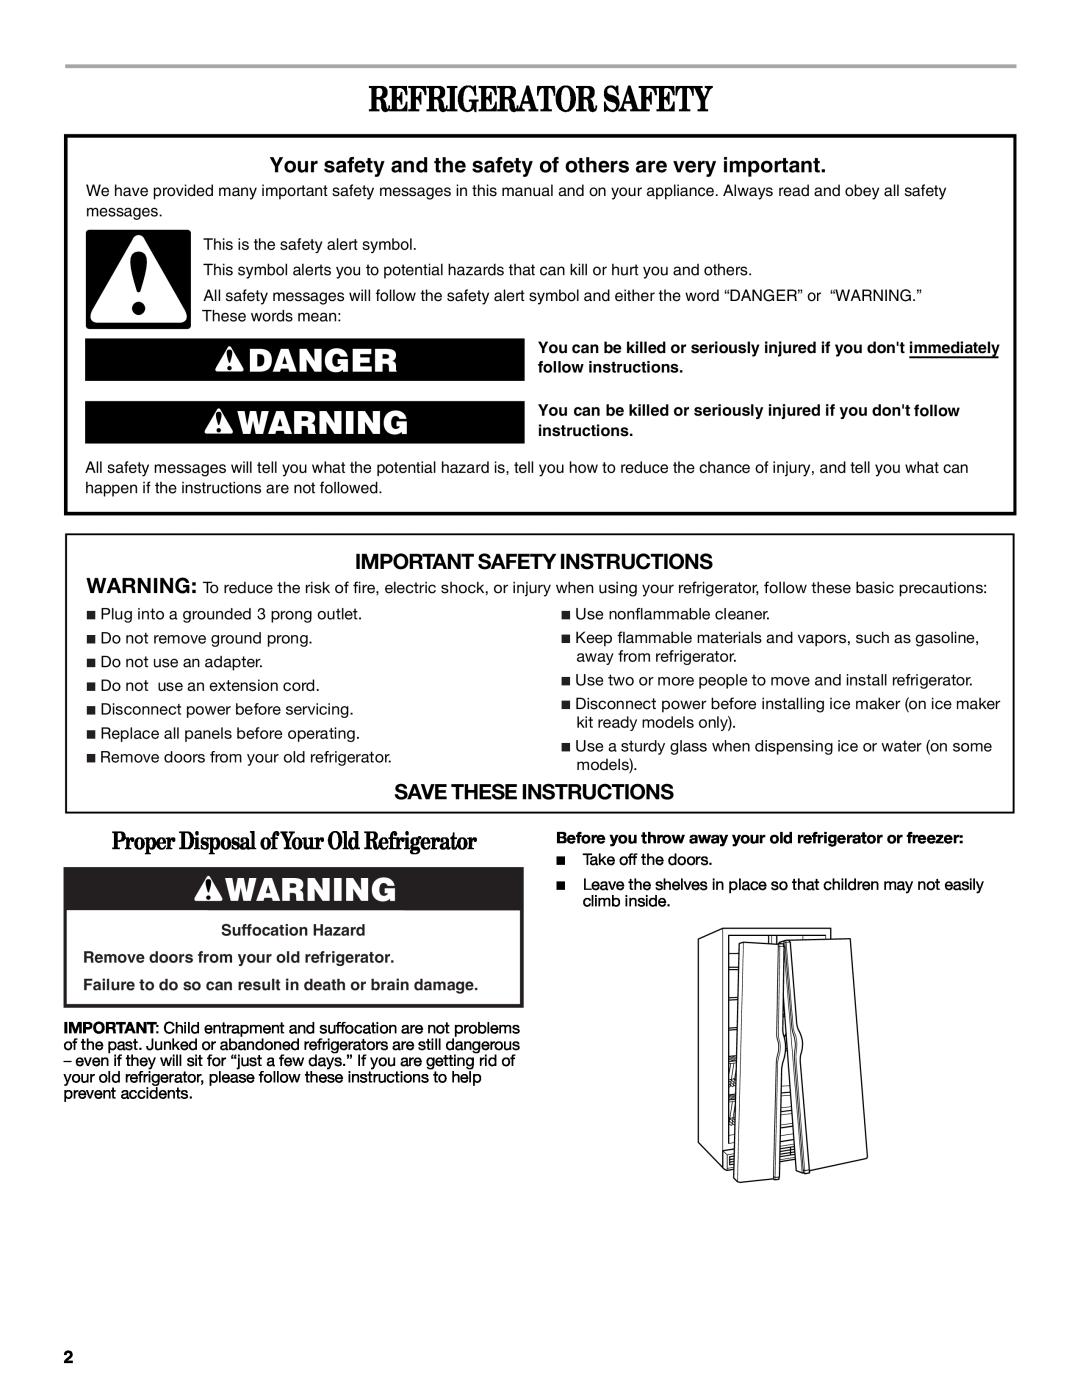 Whirlpool GS5SHAXNT warranty Refrigerator Safety, Danger, Important Safety Instructions, Save These Instructions 